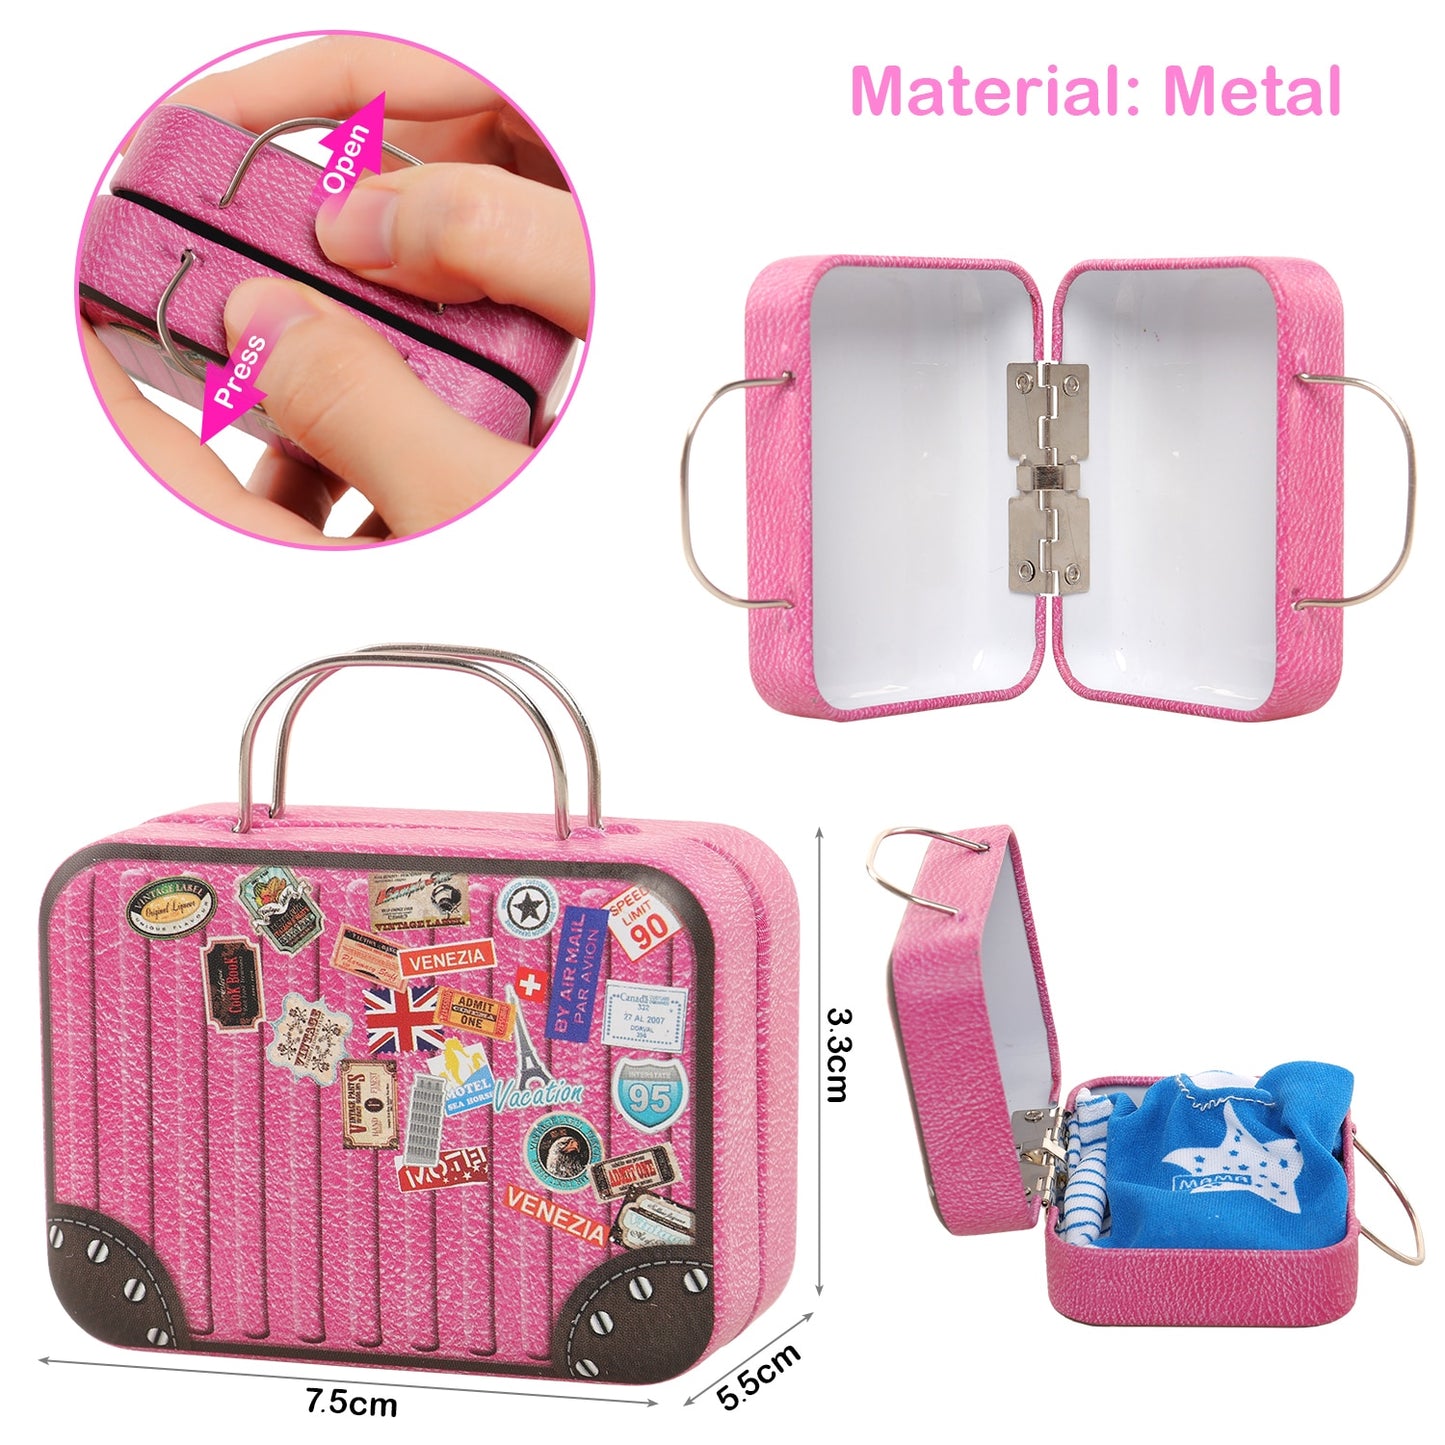 Doll Accessories Clothes Jewelry Luggage Suitcase Dollar Mini Plastic Toiletries Computer for 11.5 inch Barbiees BJD Glasses Toy